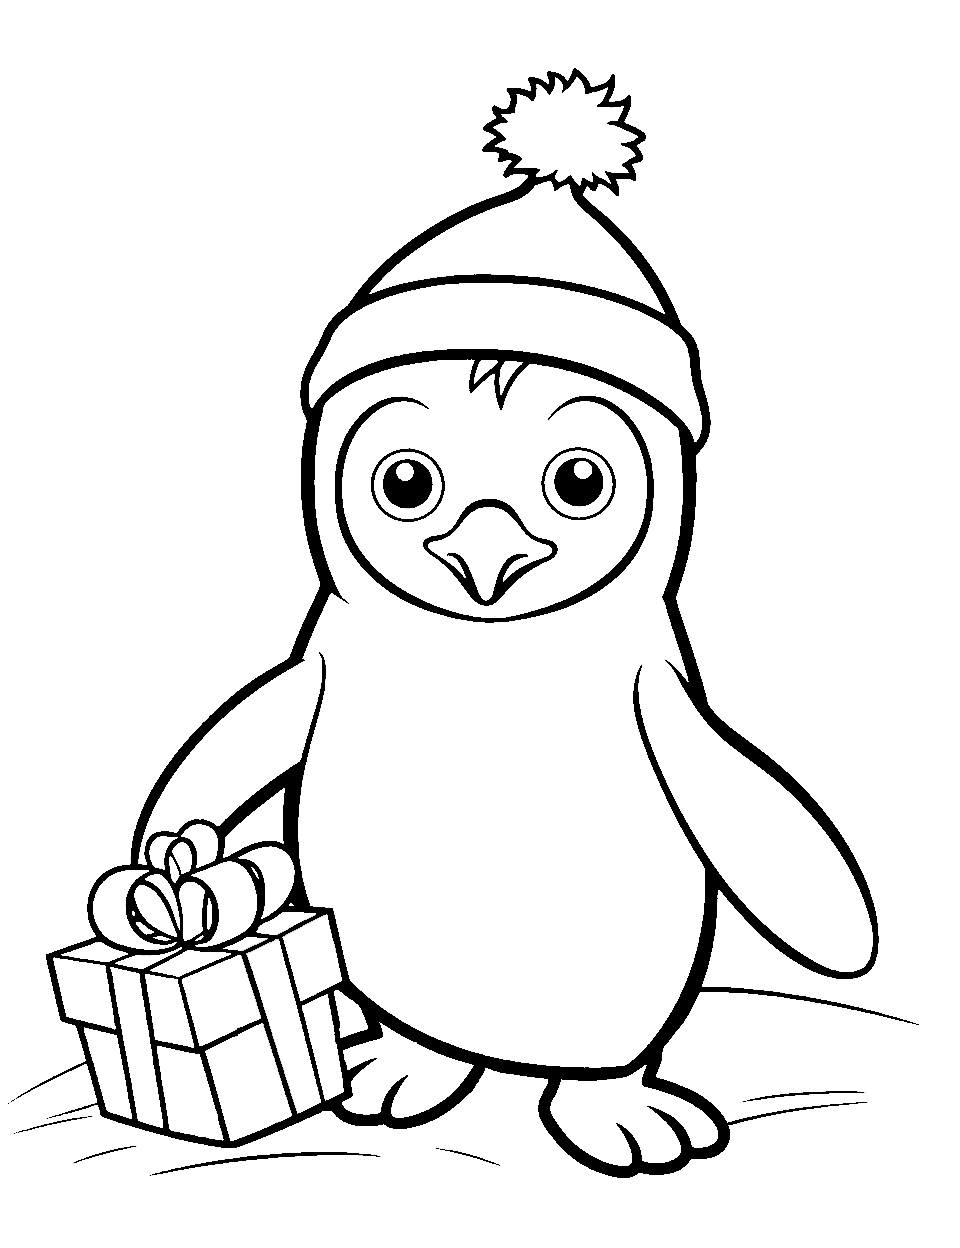 Christmas Penguin Party Coloring Page - A penguin wearing a Santa hat and carrying a wrapped present ready to celebrate Christmas.